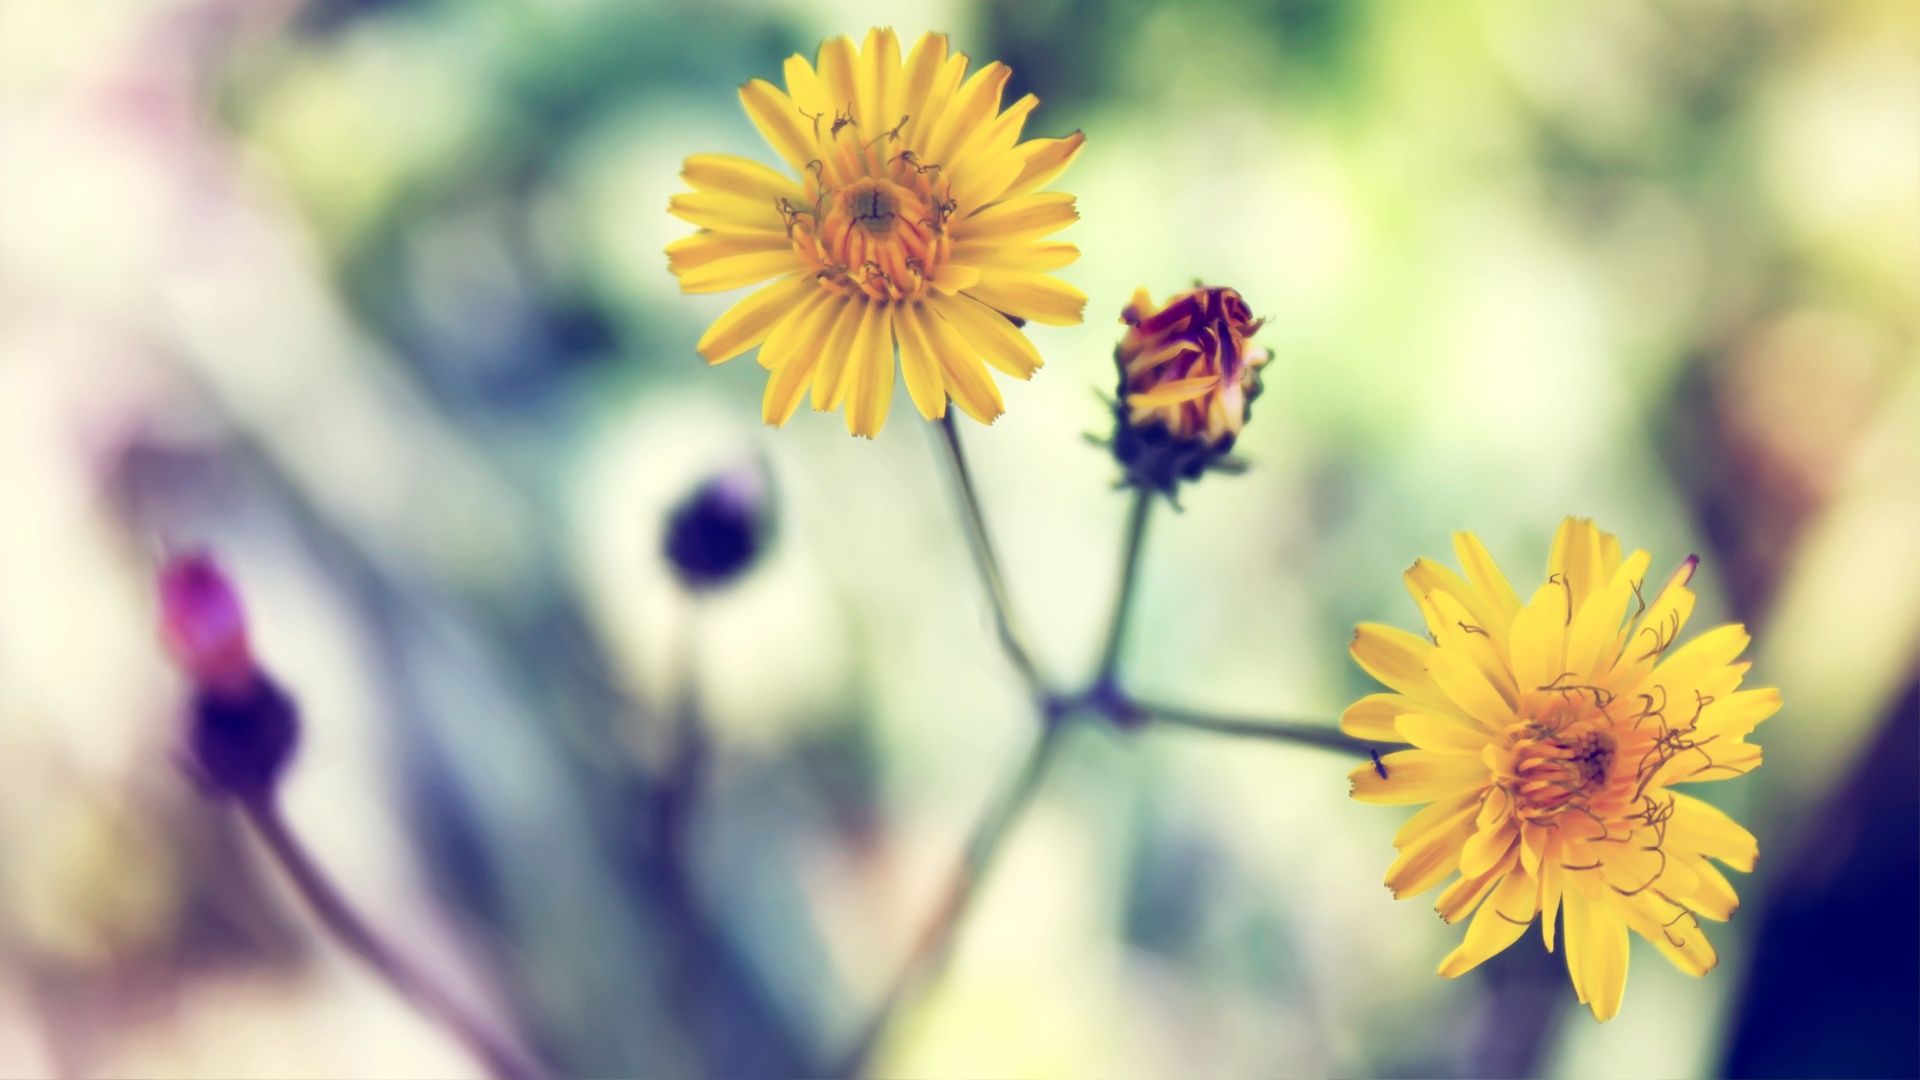 Cute Yellow Daisy Wallpapers